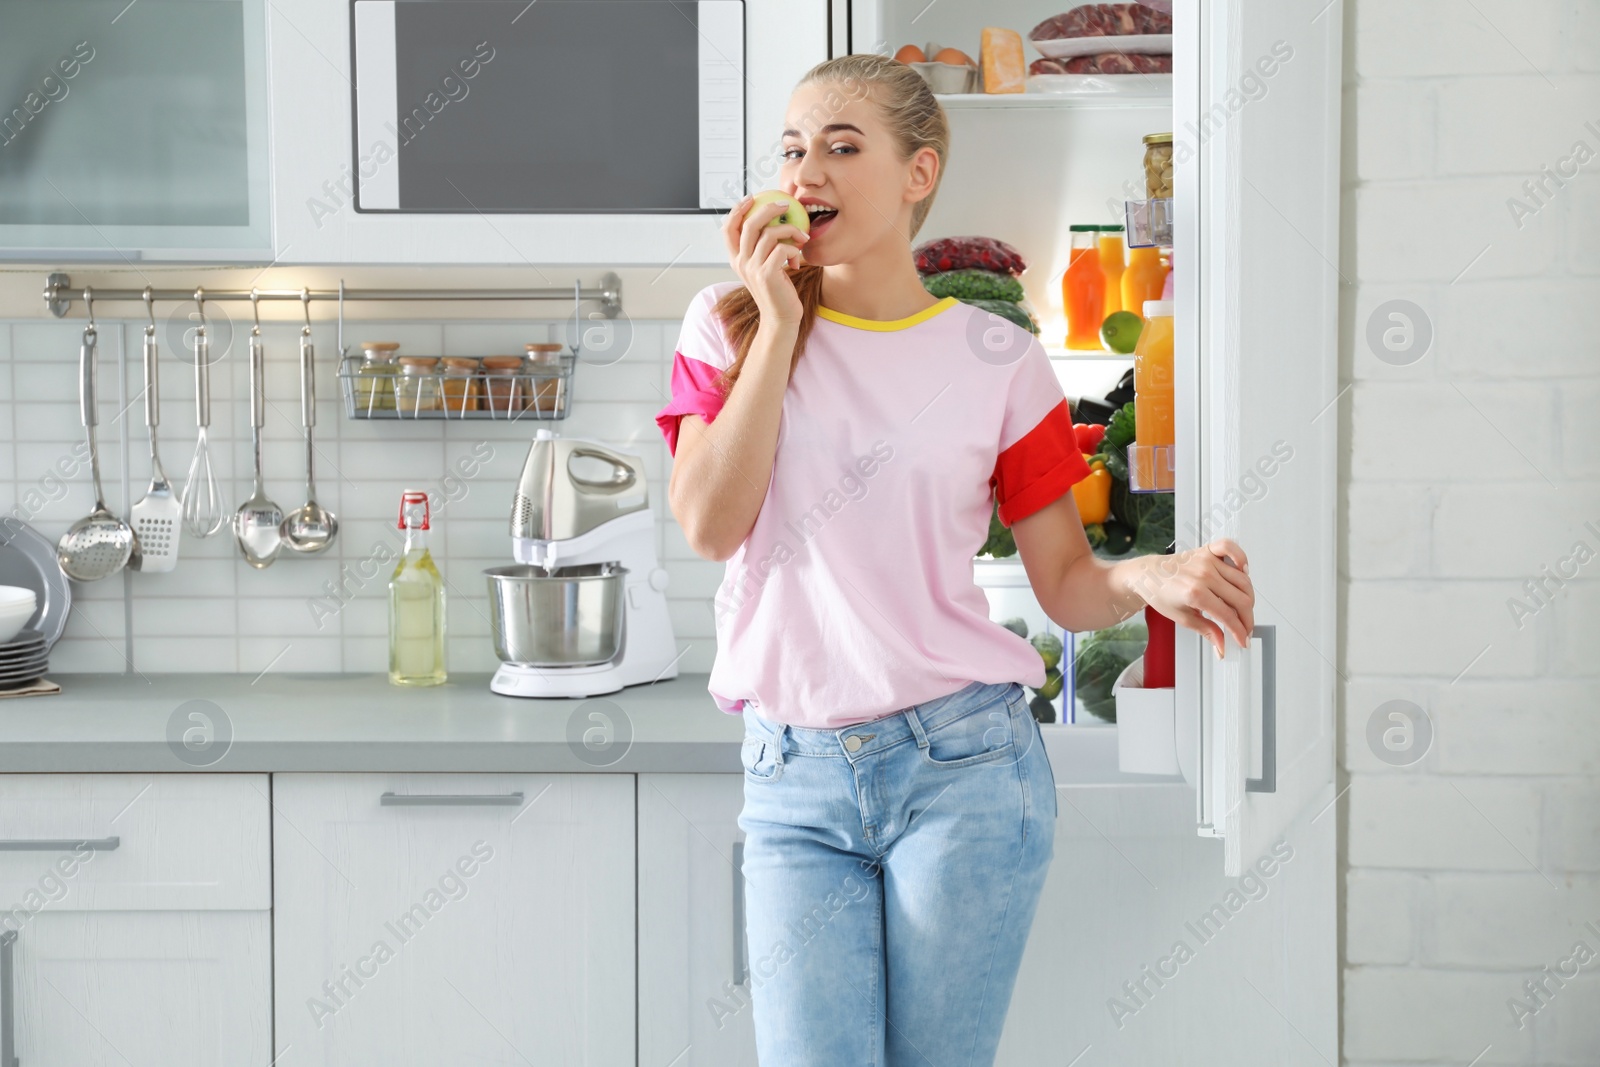 Photo of Woman with apple standing near open refrigerator in kitchen